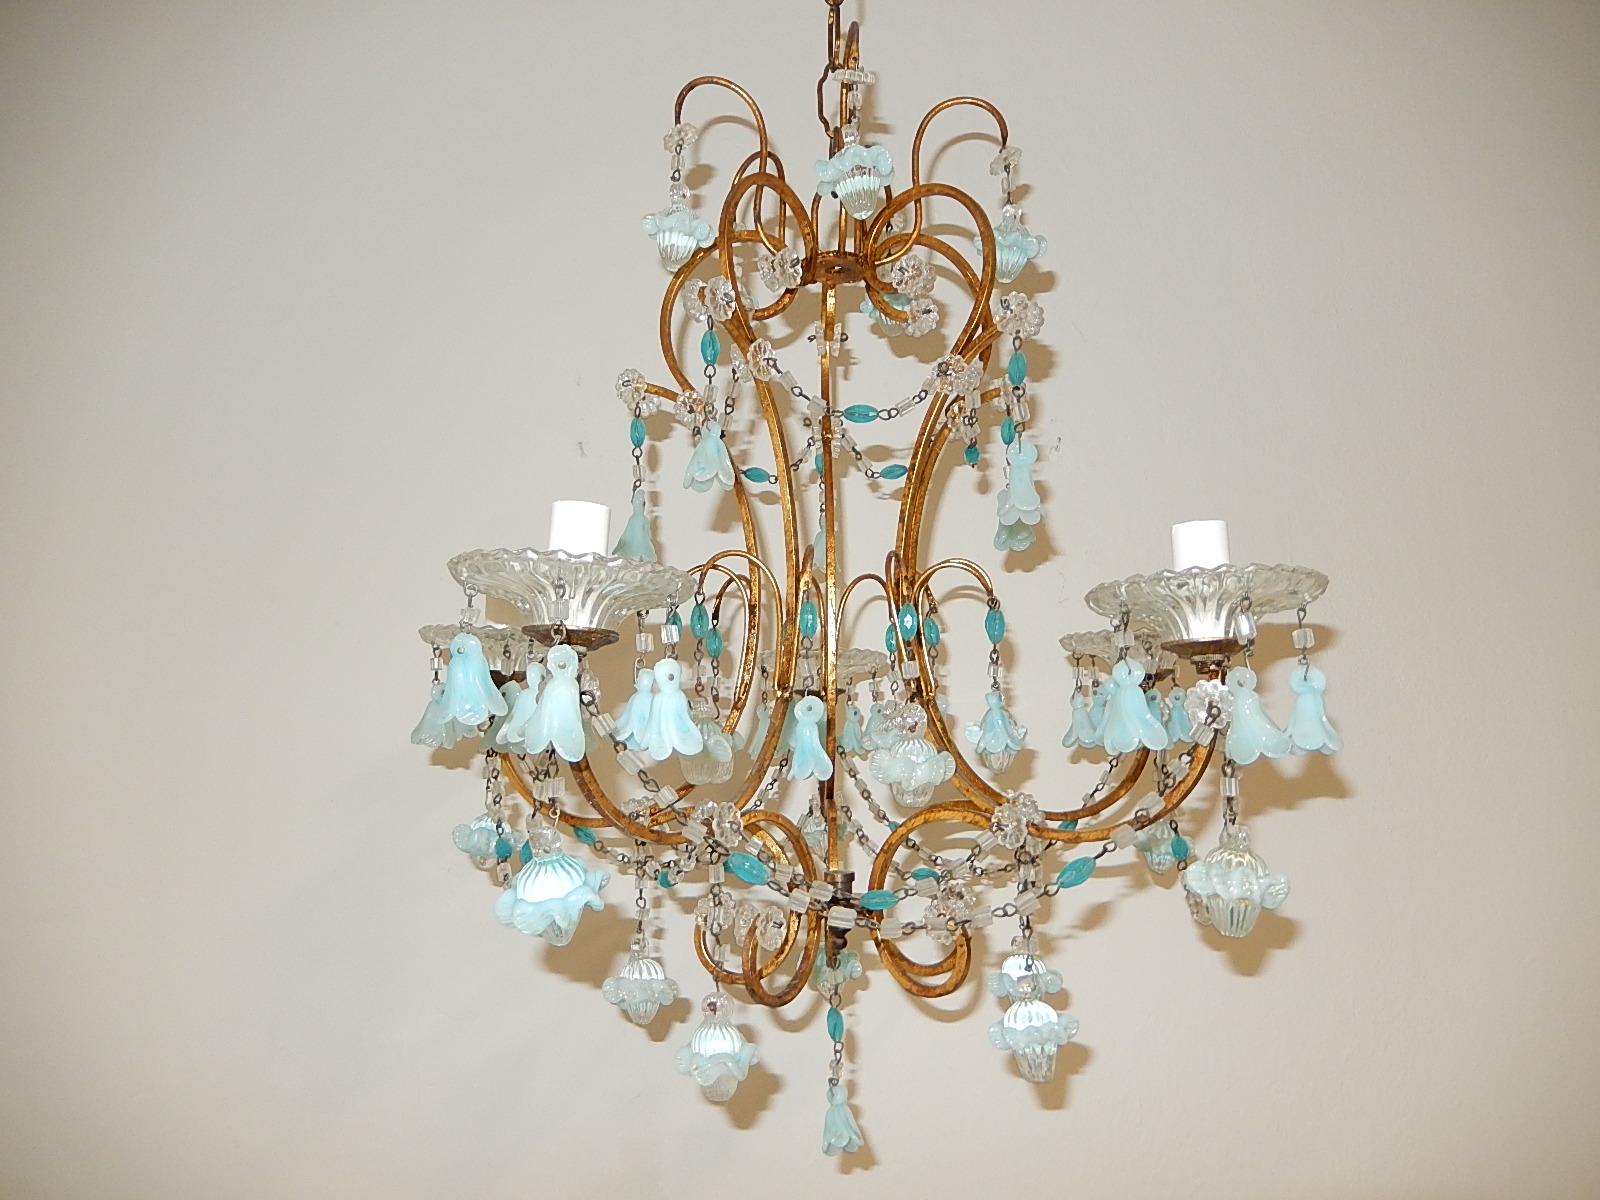 French Aqua Blue Opaline Murano Bell Flowers & Ribbons Chandelier, circa 1900 For Sale 4